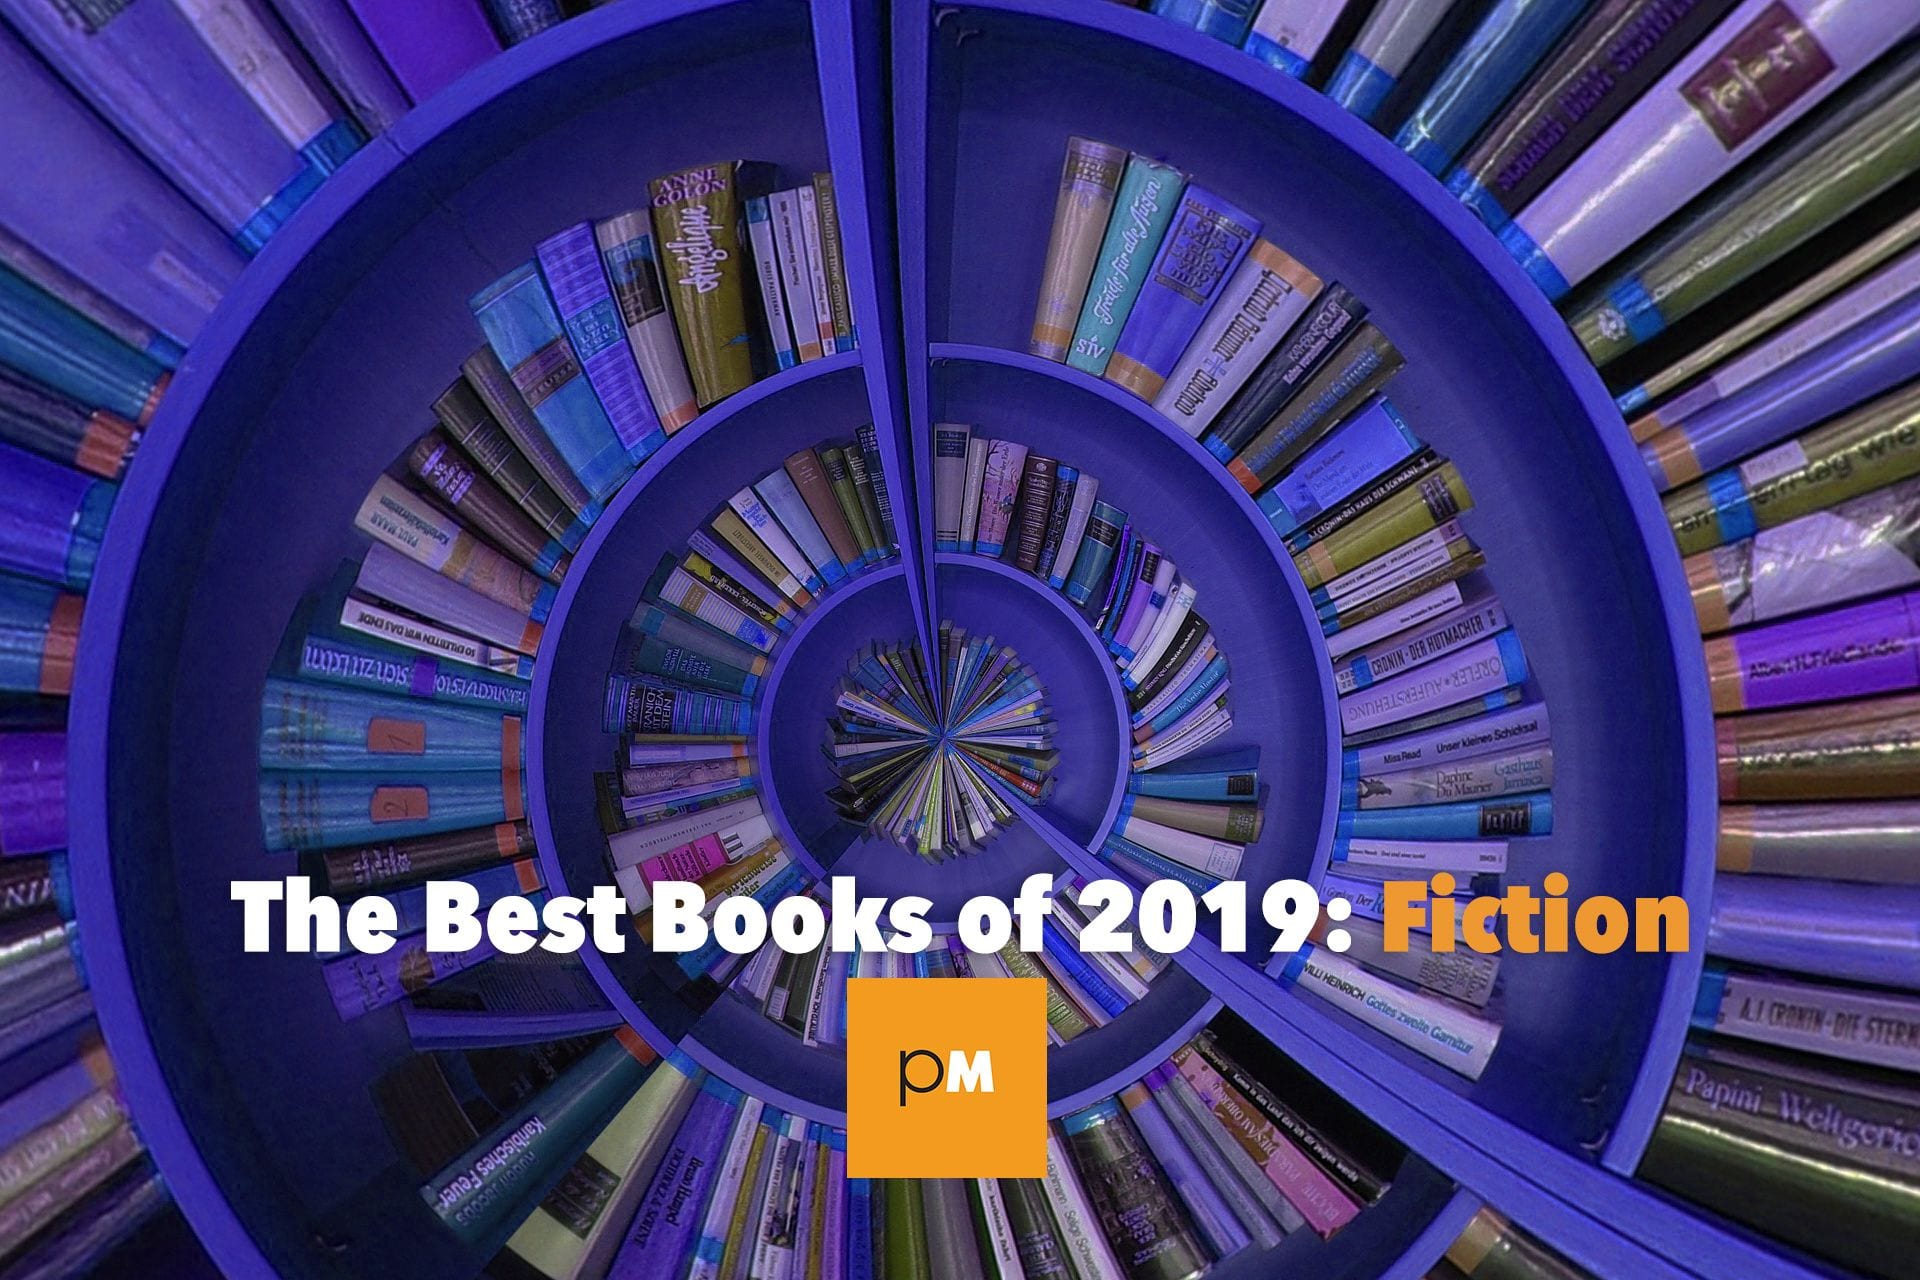 The Best Books of 2019: Fiction